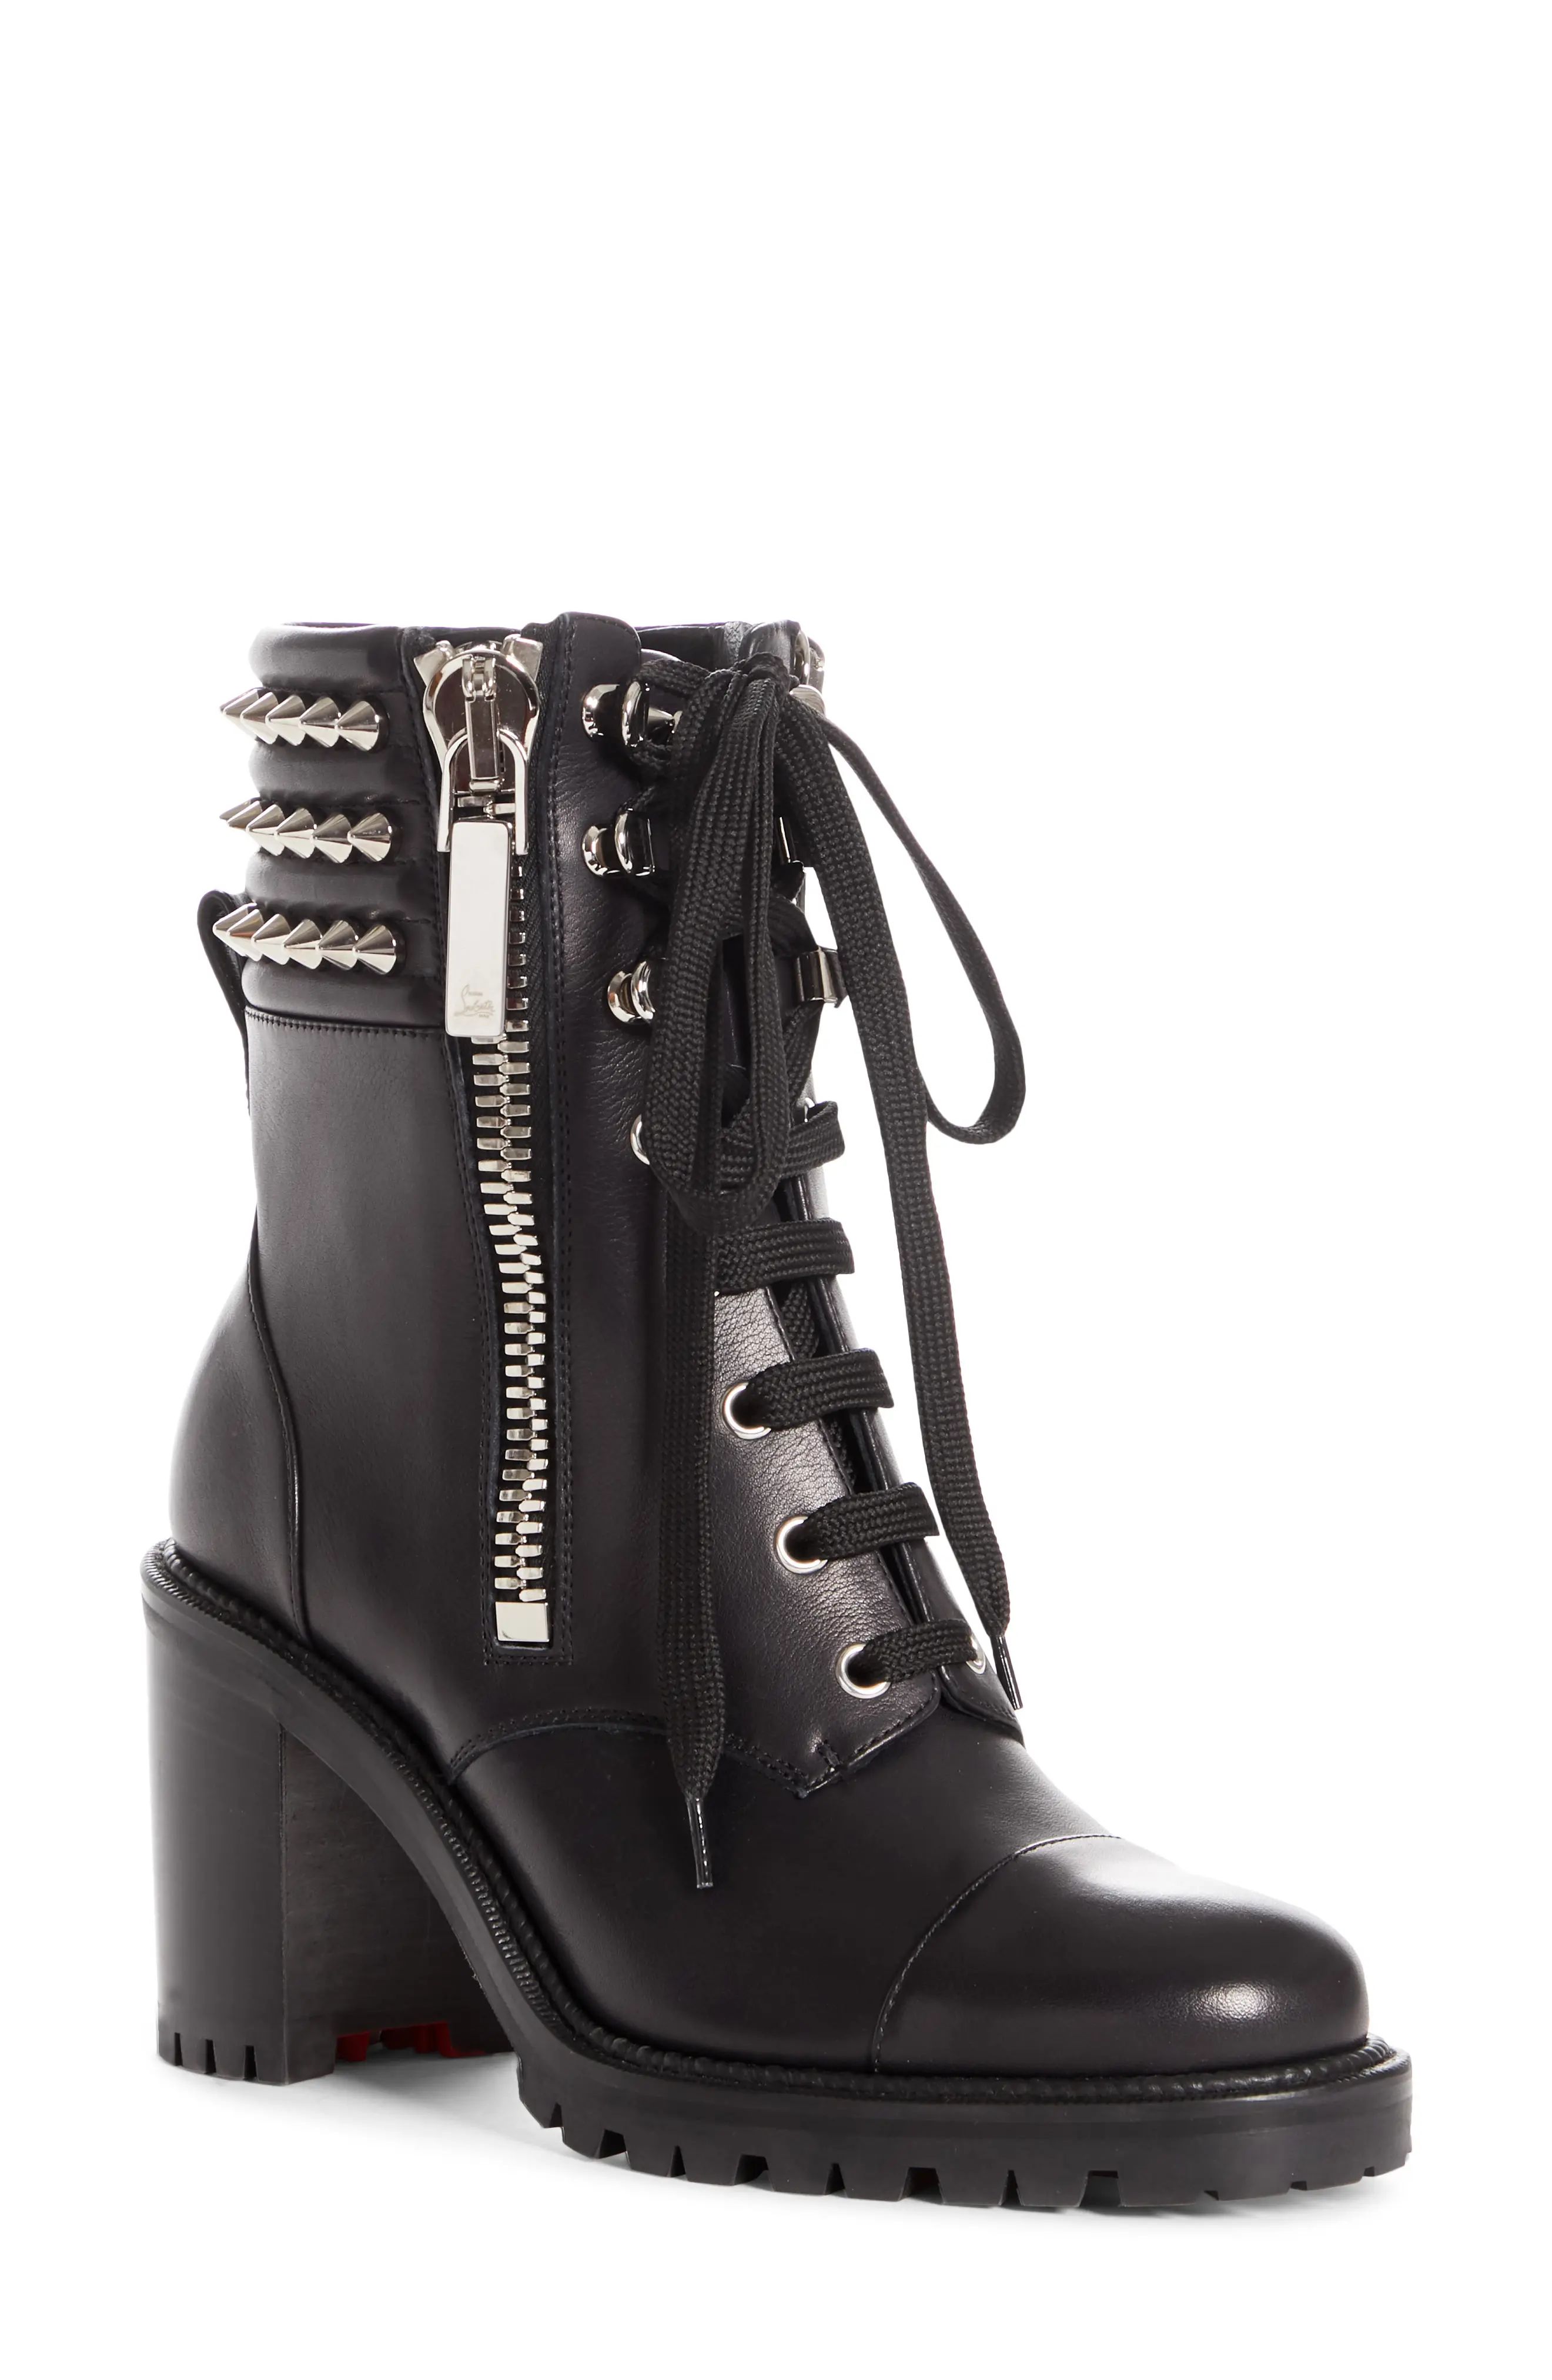 Women's Christian Louboutin Winter Spikes Lace-Up Boot, Size 4US - Black | Nordstrom